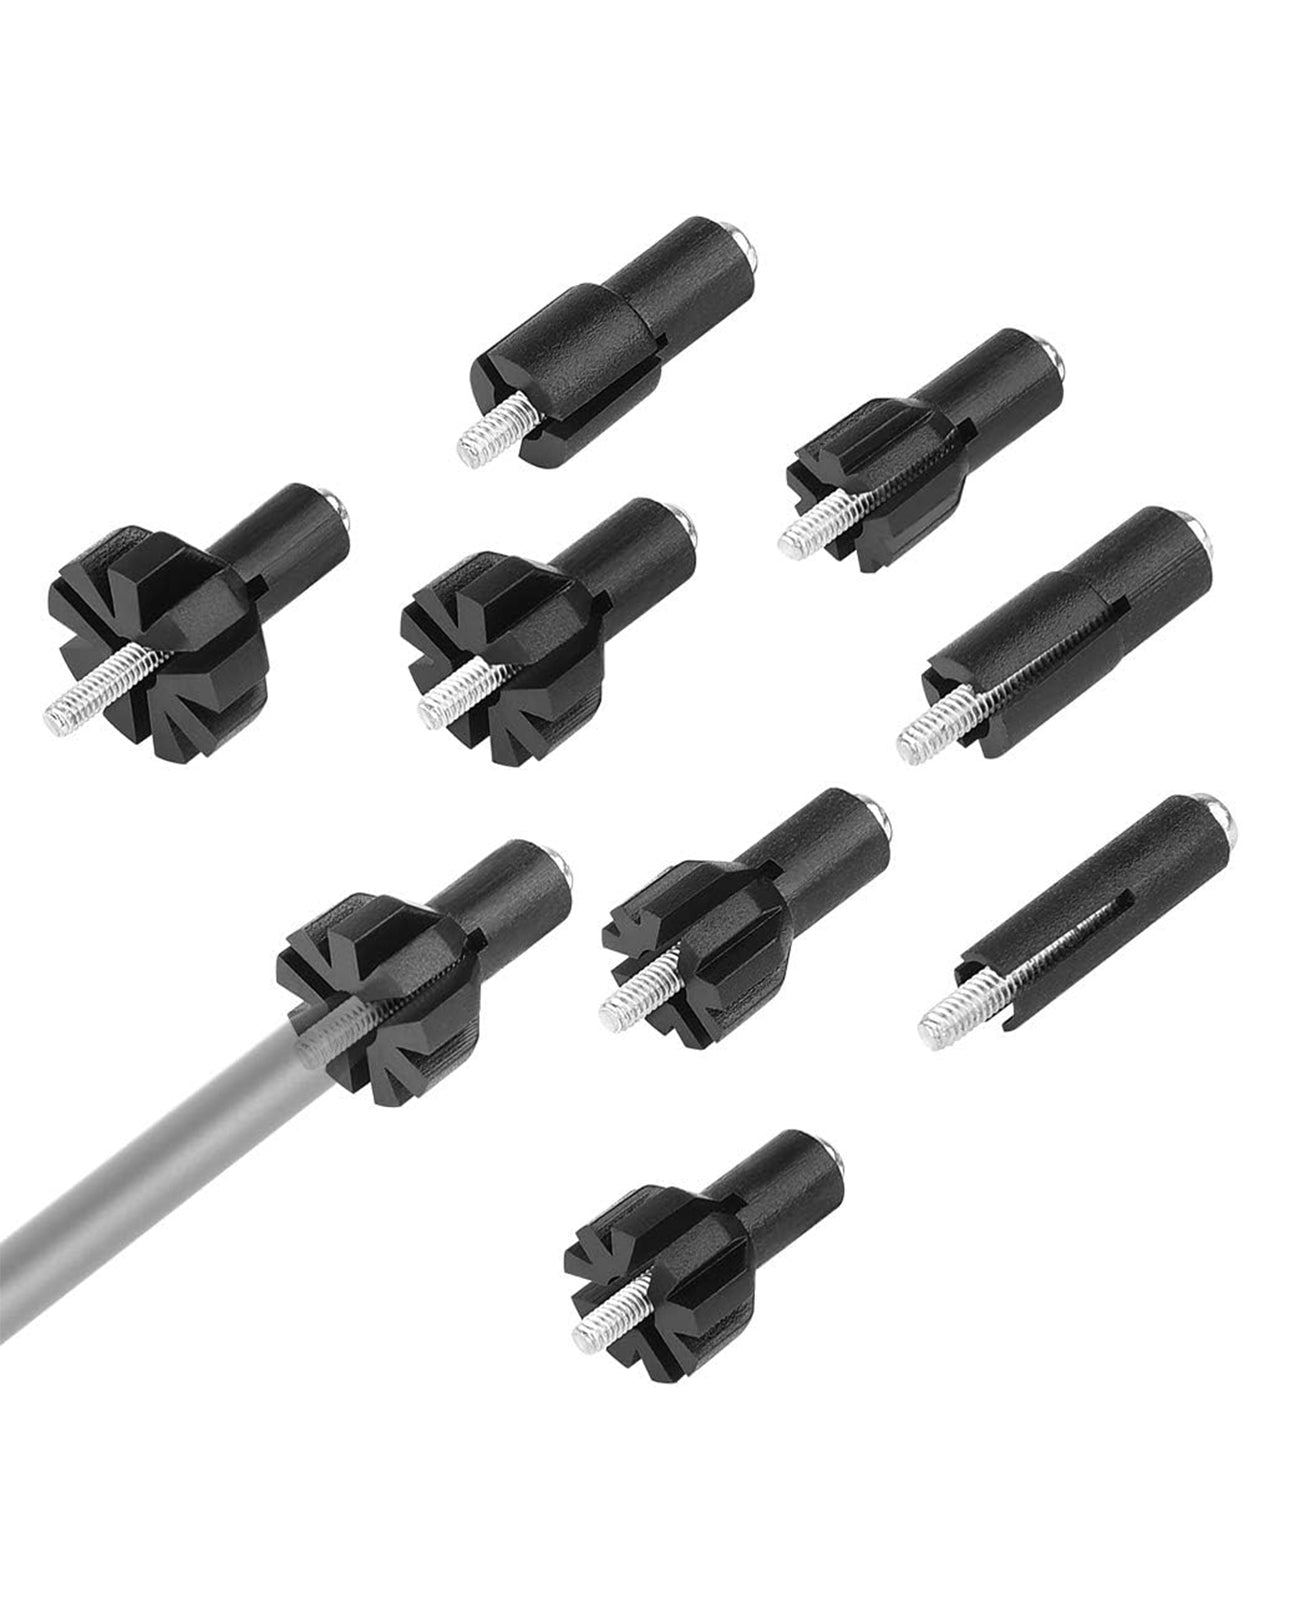 Boresighter's Adapters and Screws for 0.177-0.54 Calibers